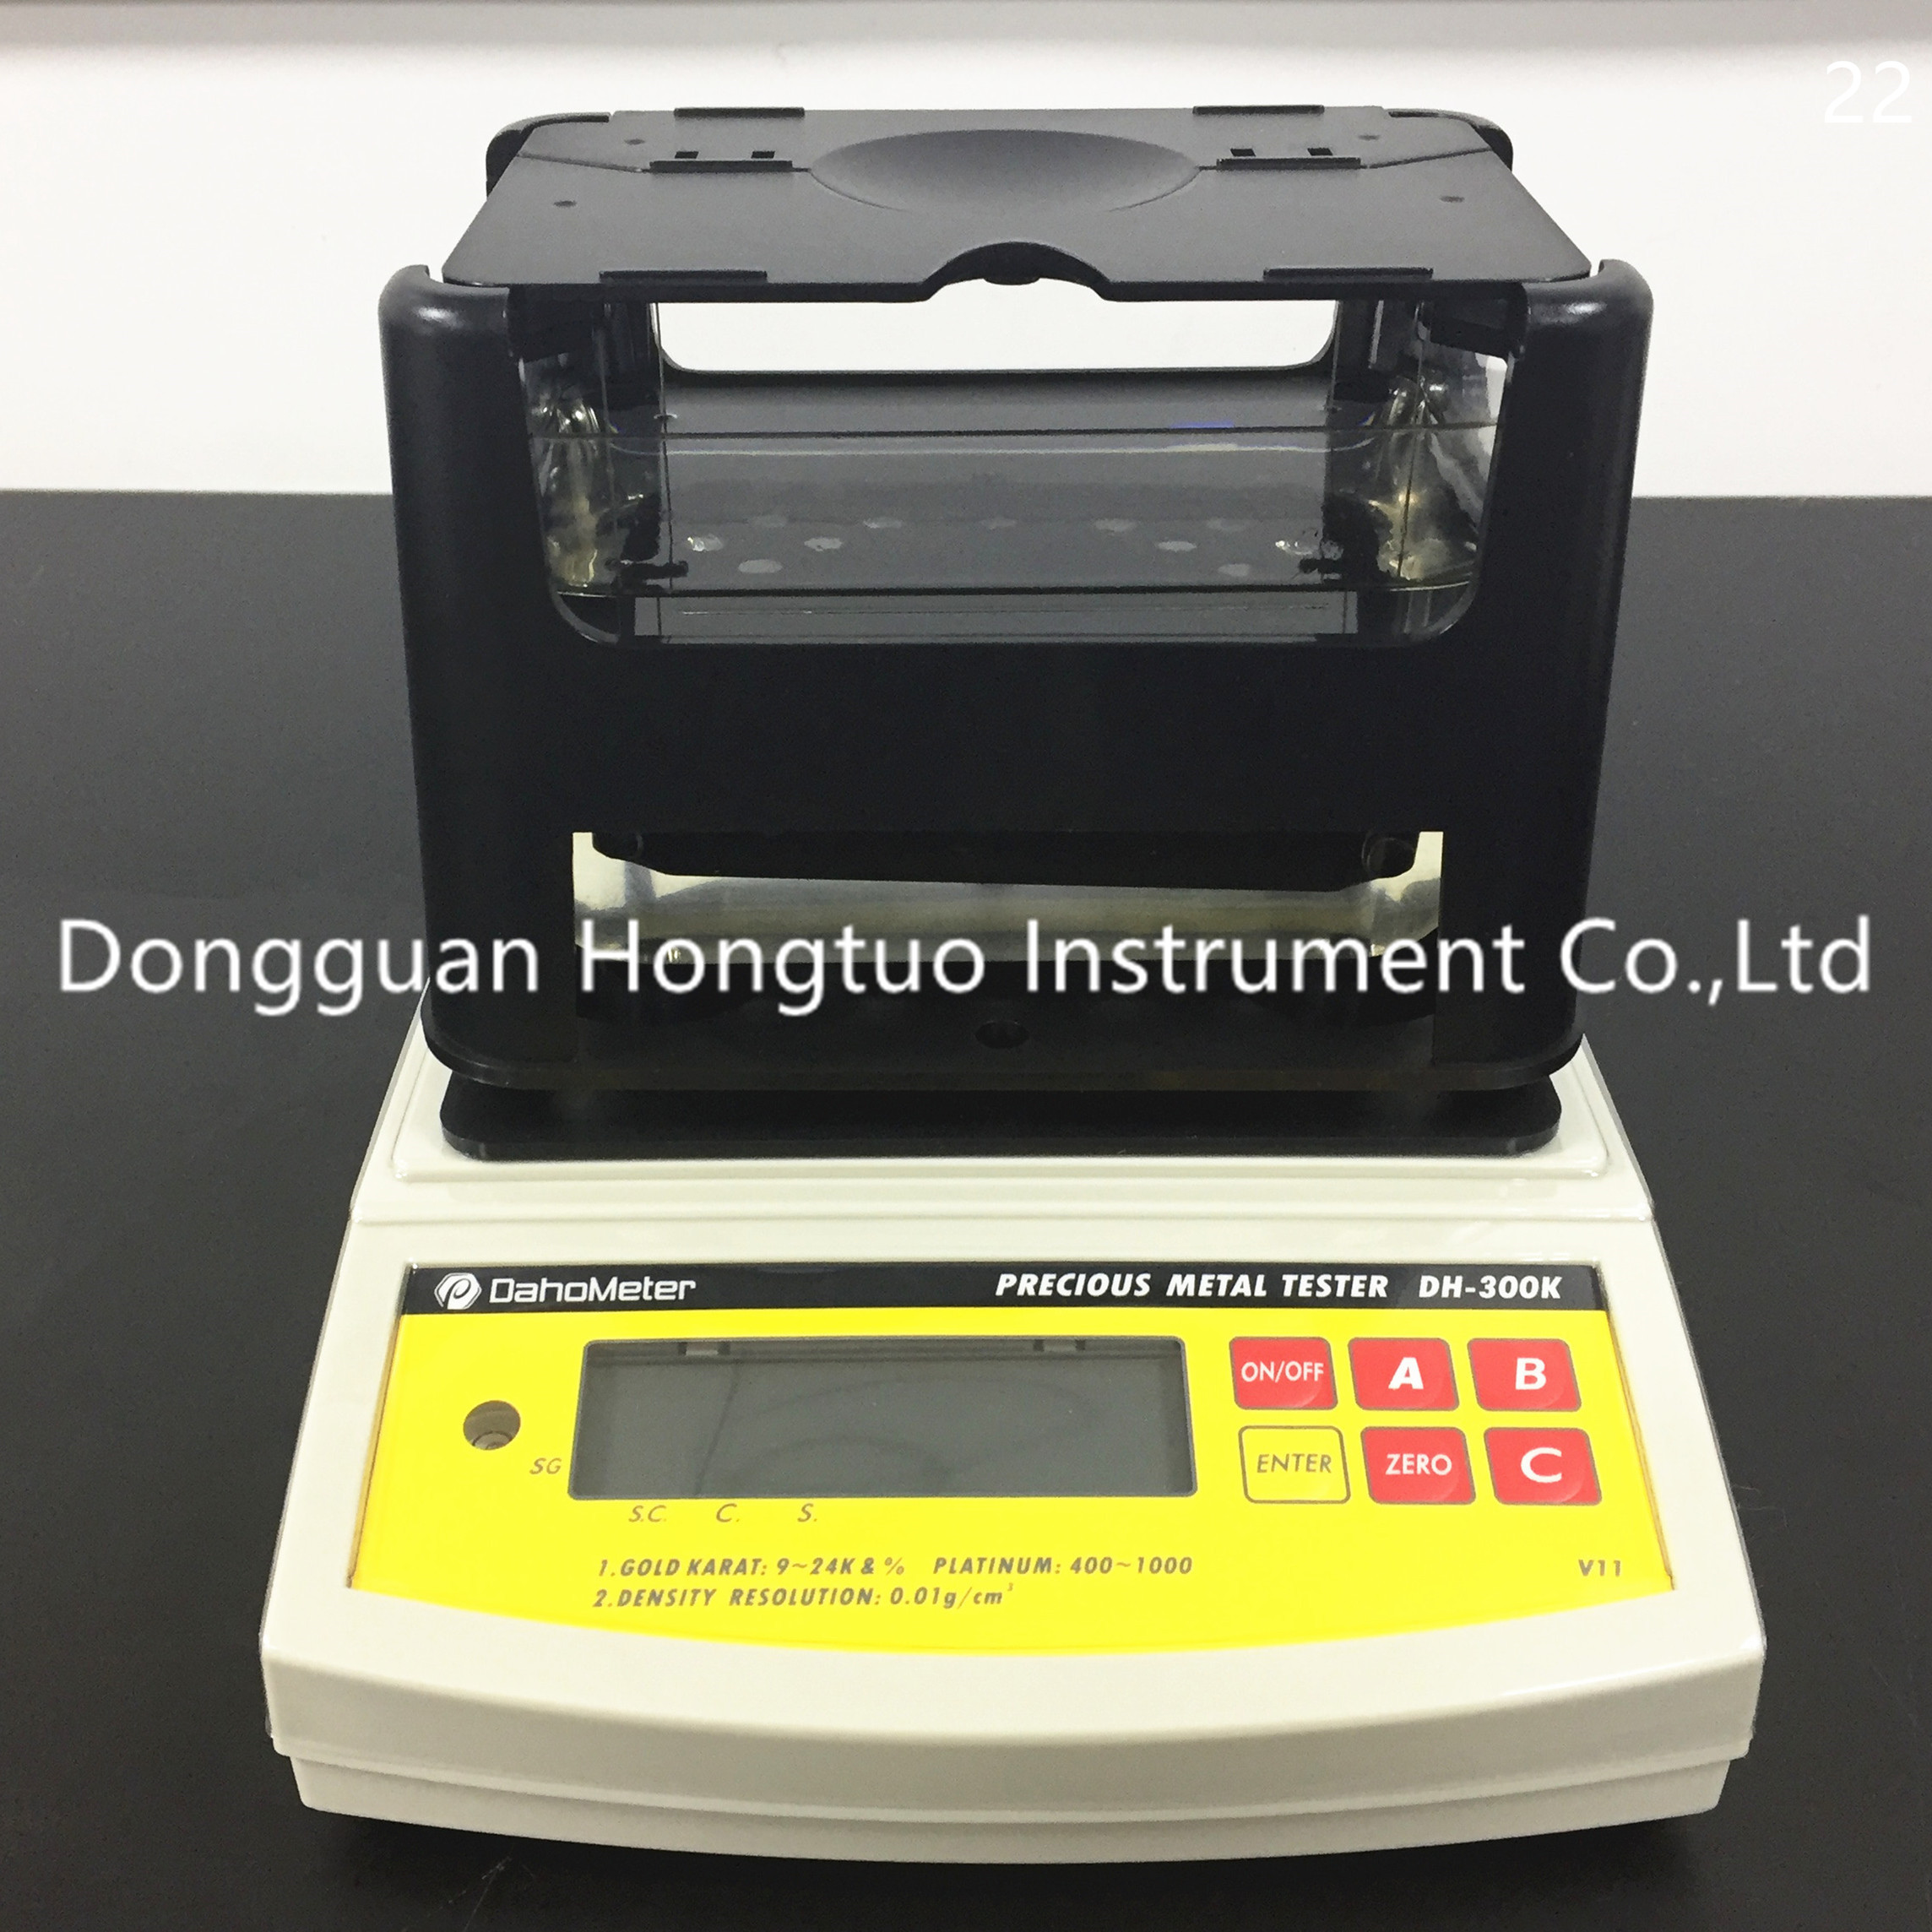 DH-300K Digital Electronic Gold purity Tester Gold Density Meter Precious Metal Tester Gold Silver Tester Machine